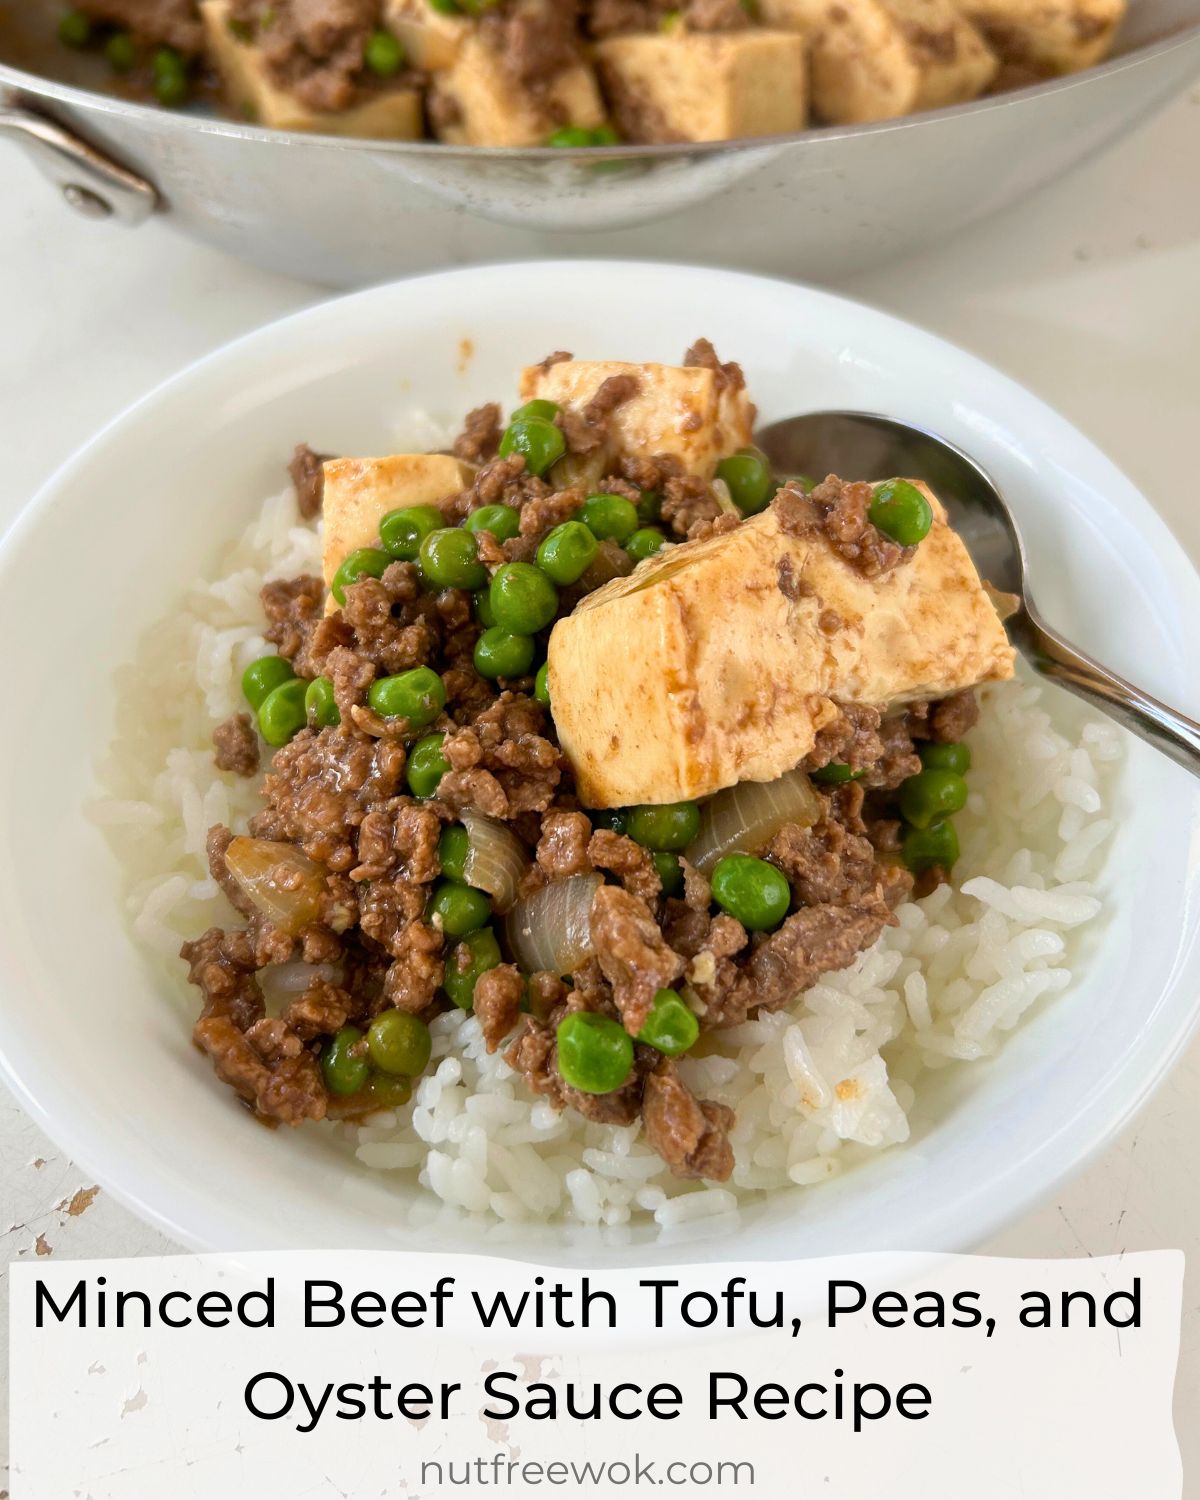 https://nutfreewok.com/wp-content/uploads/2024/01/Minced-Beef-with-Tofu-Peas-and-Oyster-Sauce.jpg